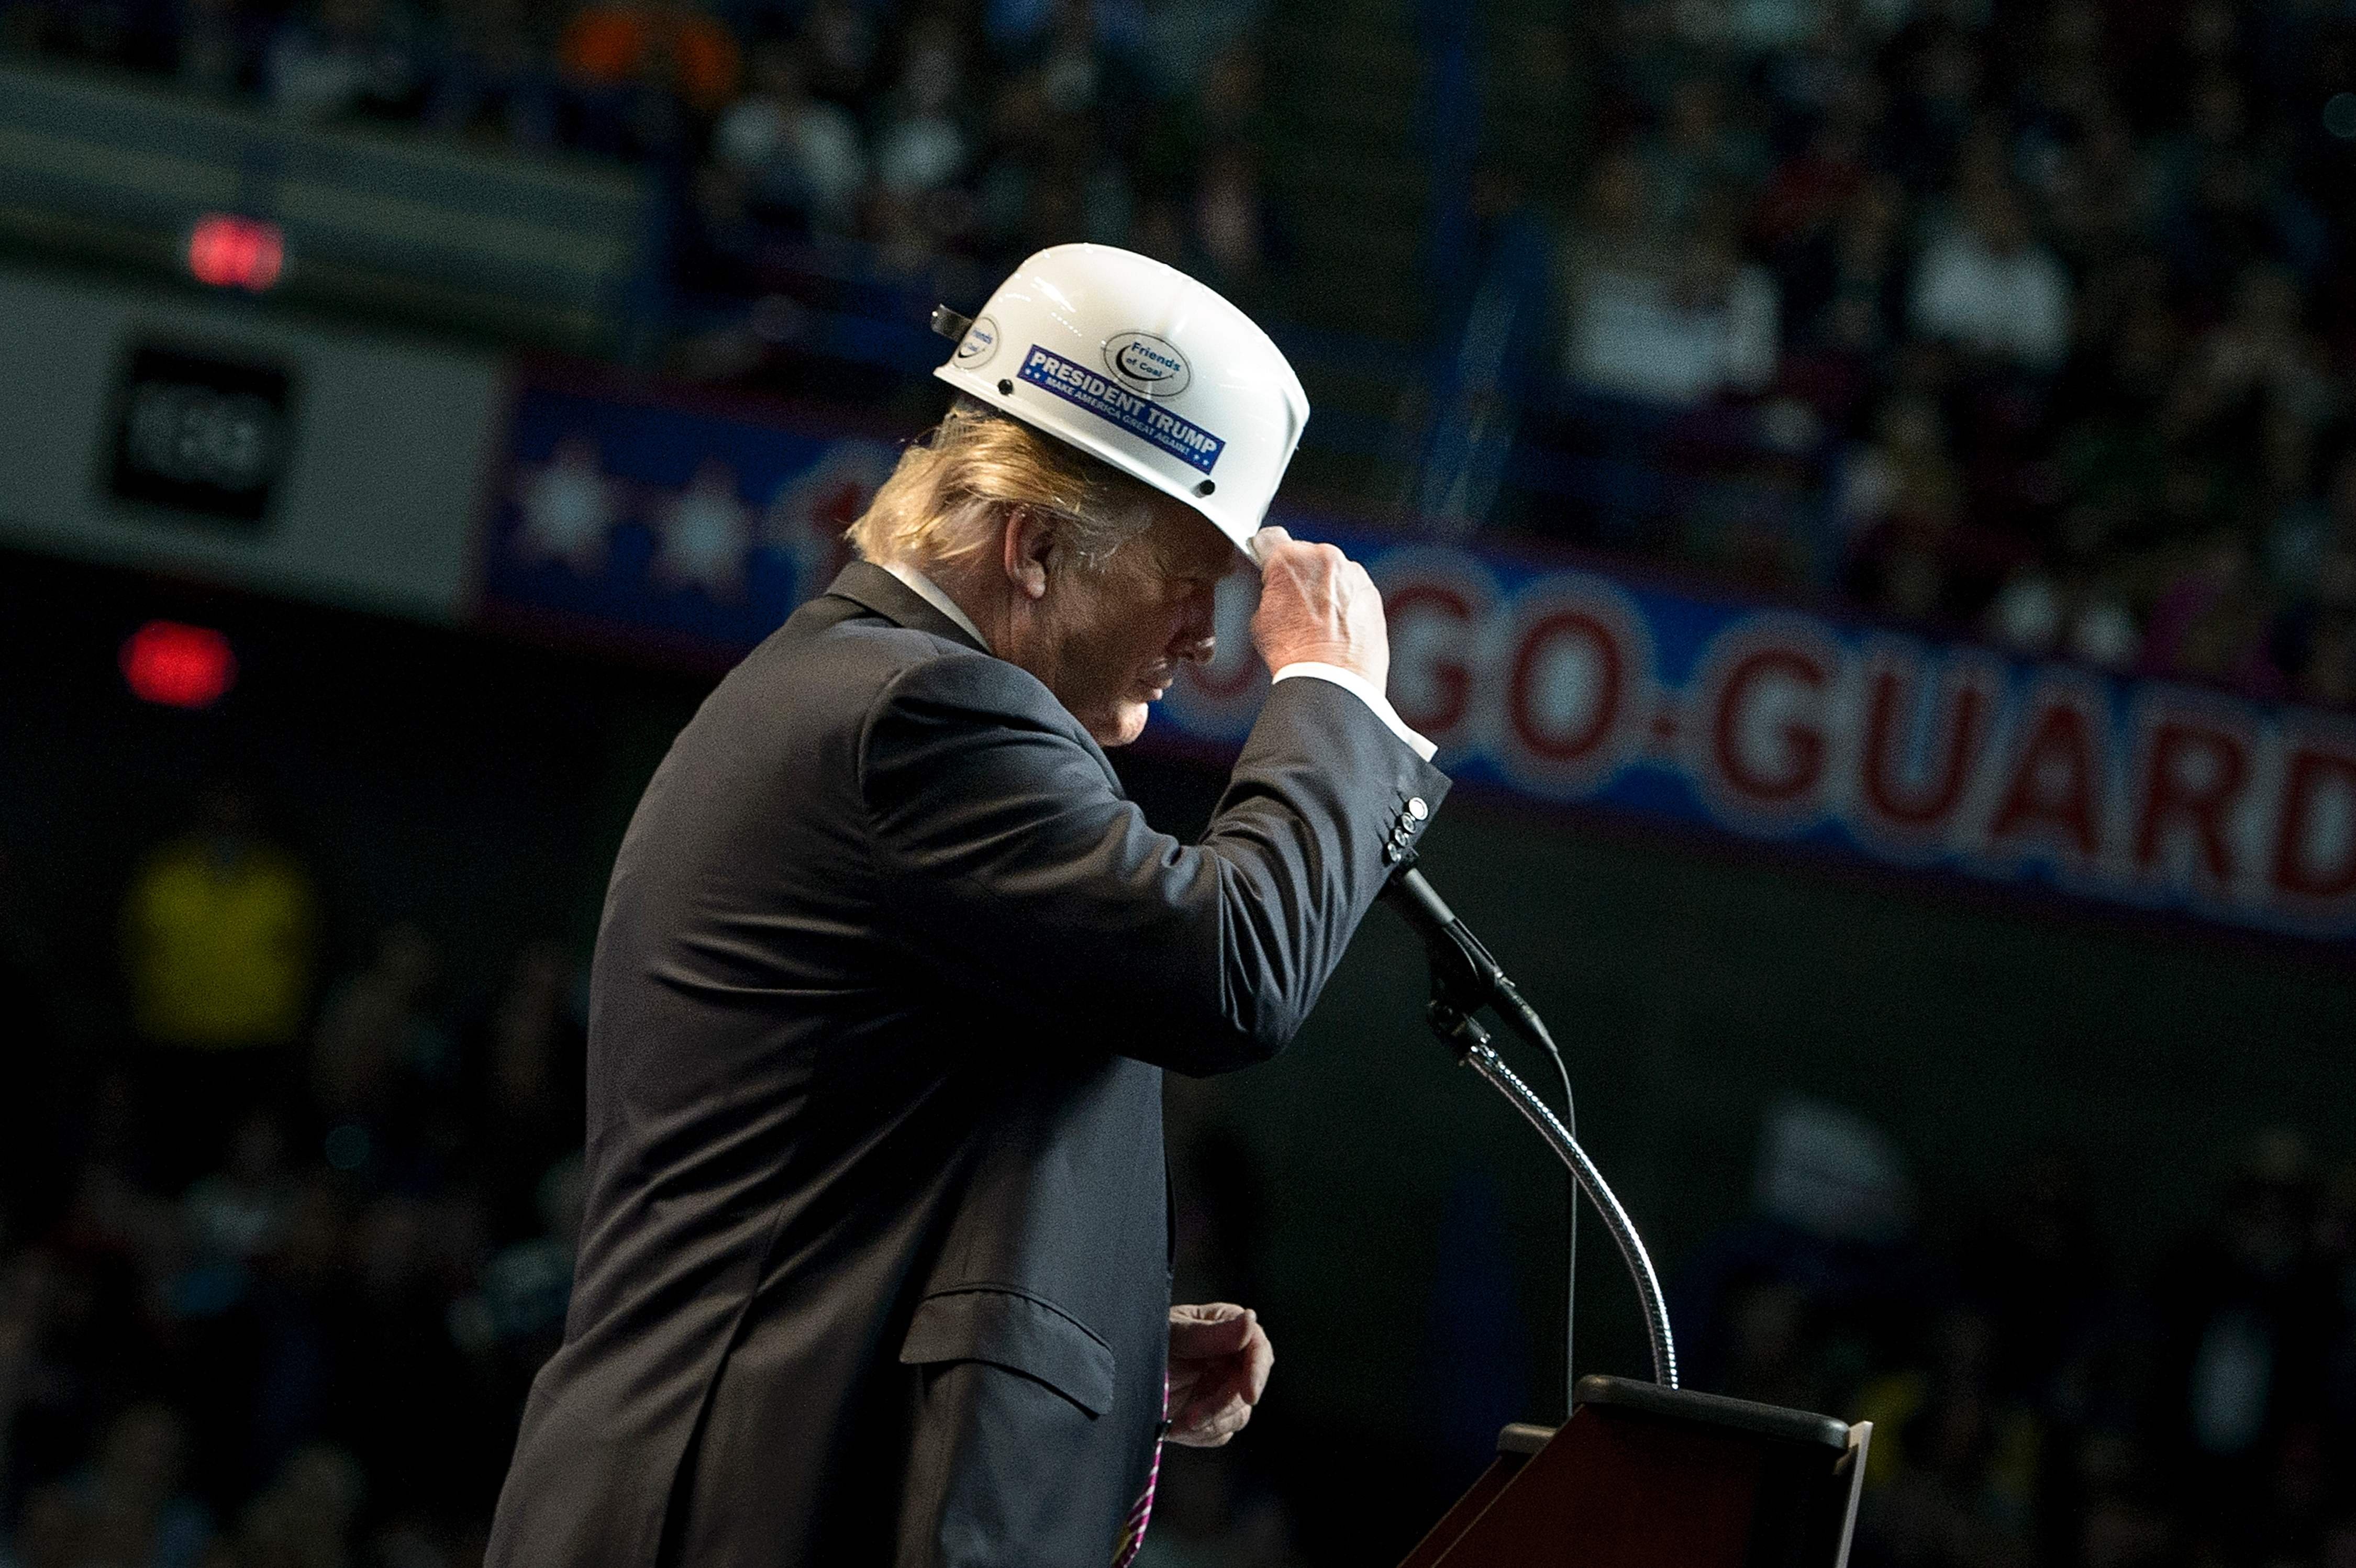 Donald Trump puts on a miner's hat while speaking during a rally on May 5, 2016 in Charleston, West Virginia. (Brendan Smialowski—AFP/Getty Images)